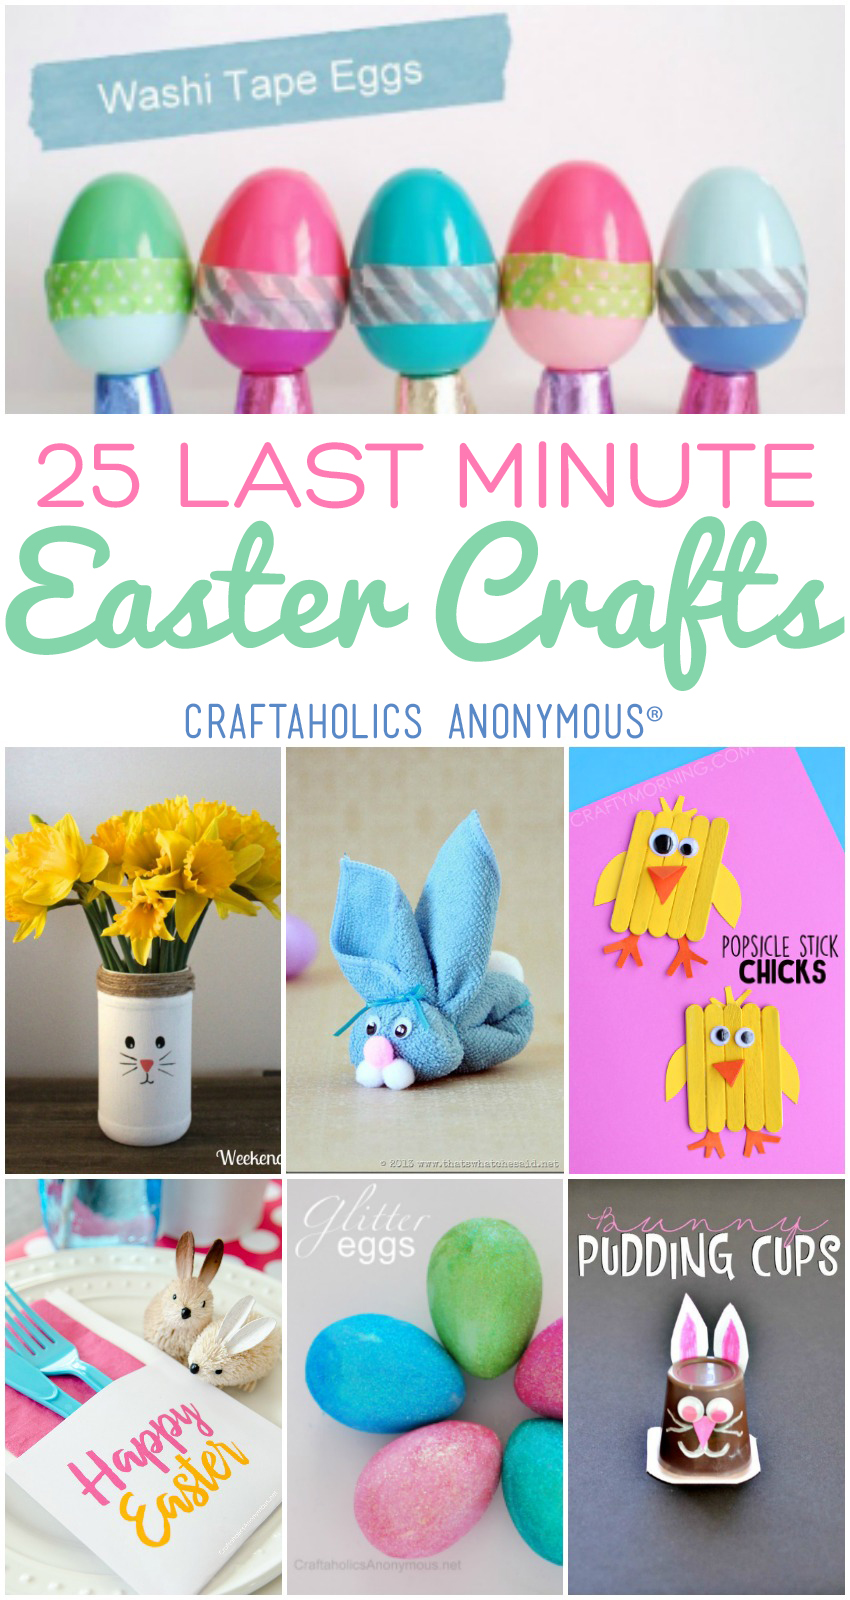 Craftaholics Anonymous® | Last Minute Easy Easter Crafts!